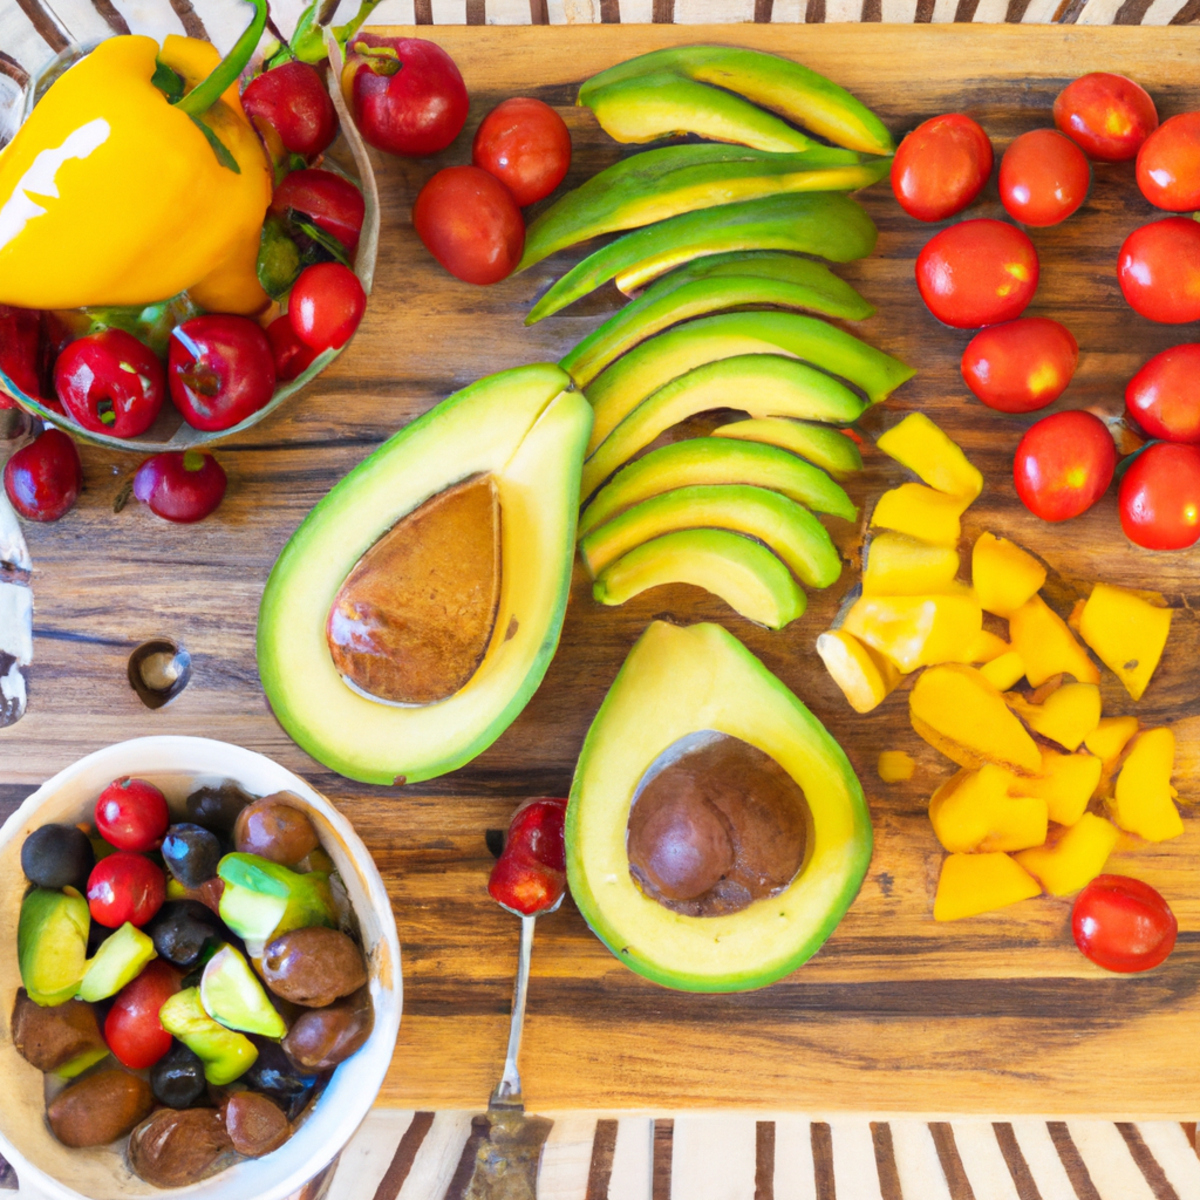 The photo features a colorful array of superfoods arranged on a wooden cutting board. In the center of the photo is a ripe avocado, sliced in half to reveal its creamy green flesh. Surrounding the avocado are vibrant red and yellow bell peppers, sliced into thin strips, and a handful of juicy cherry tomatoes. A small bowl of mixed berries, including blueberries and raspberries, sits in the corner of the photo, adding a pop of purple and red to the scene. A sprig of fresh mint leaves is delicately placed on top of the avocado, adding a touch of greenery to the composition. The photo is expertly lit, with the natural colors of the superfoods shining through and making the viewer's mouth water in anticipation of the delicious and healthy meal that could be made with these ingredients.